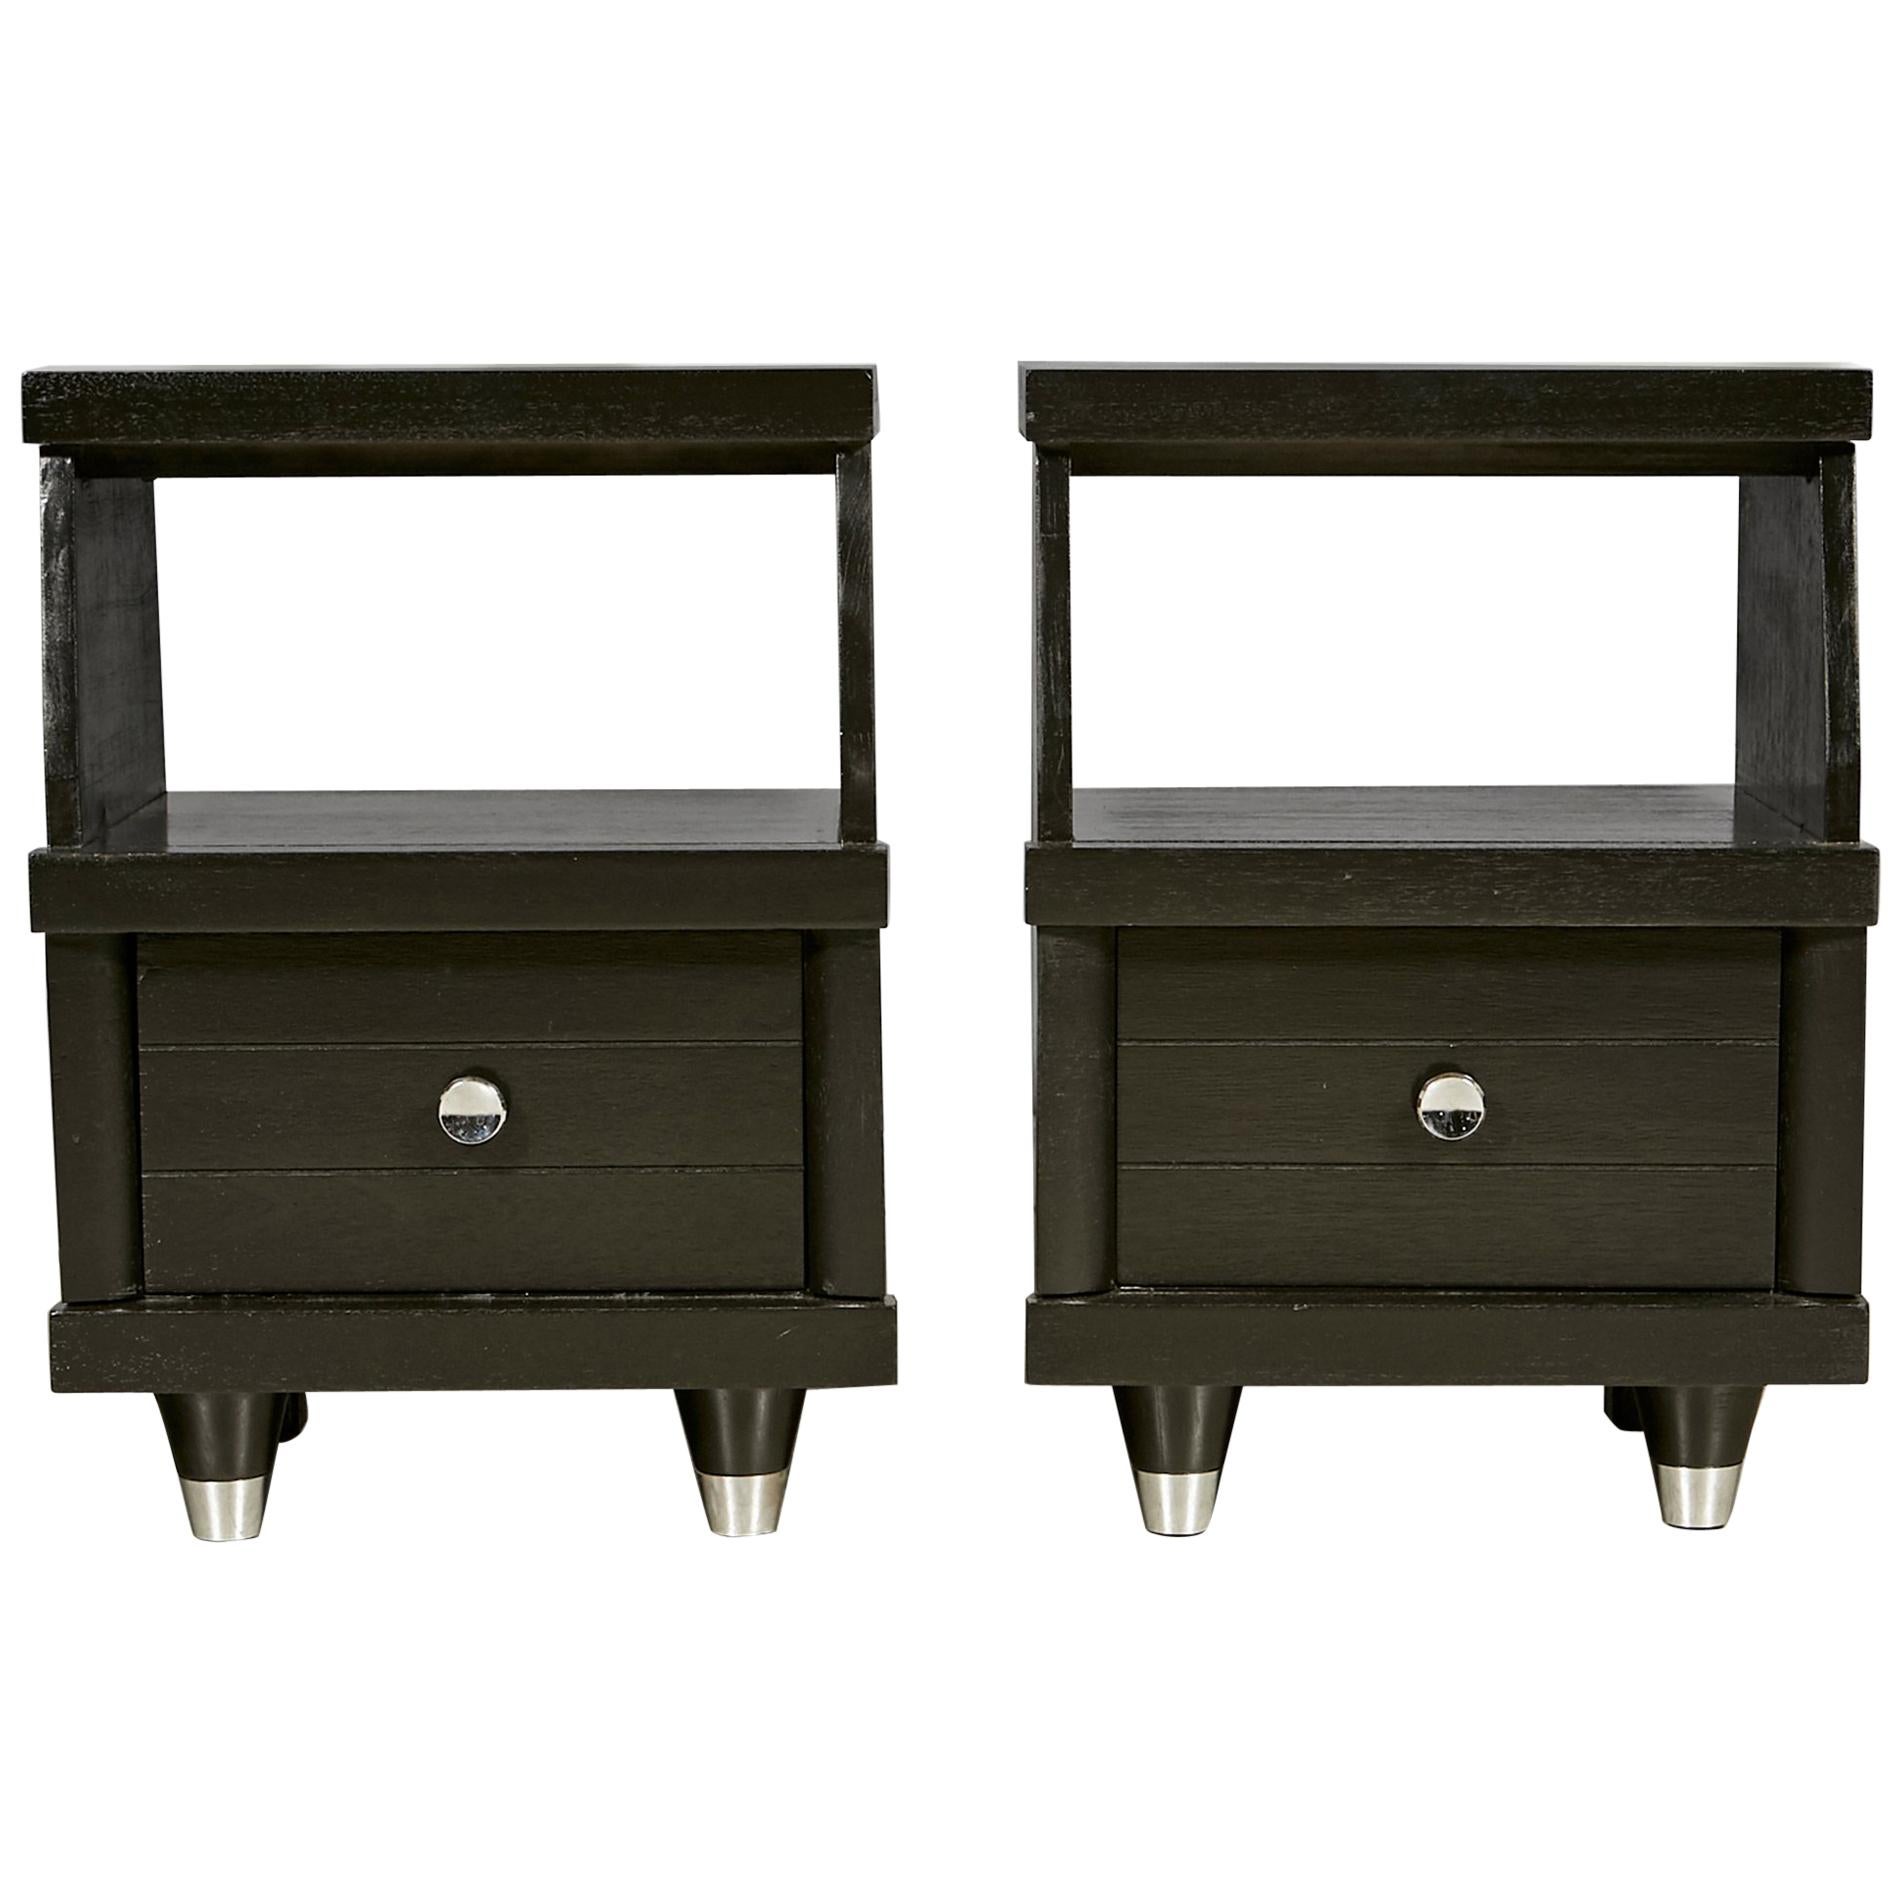 Mid-20th Century Modern Black Lacquered Nightstands, Pair For Sale